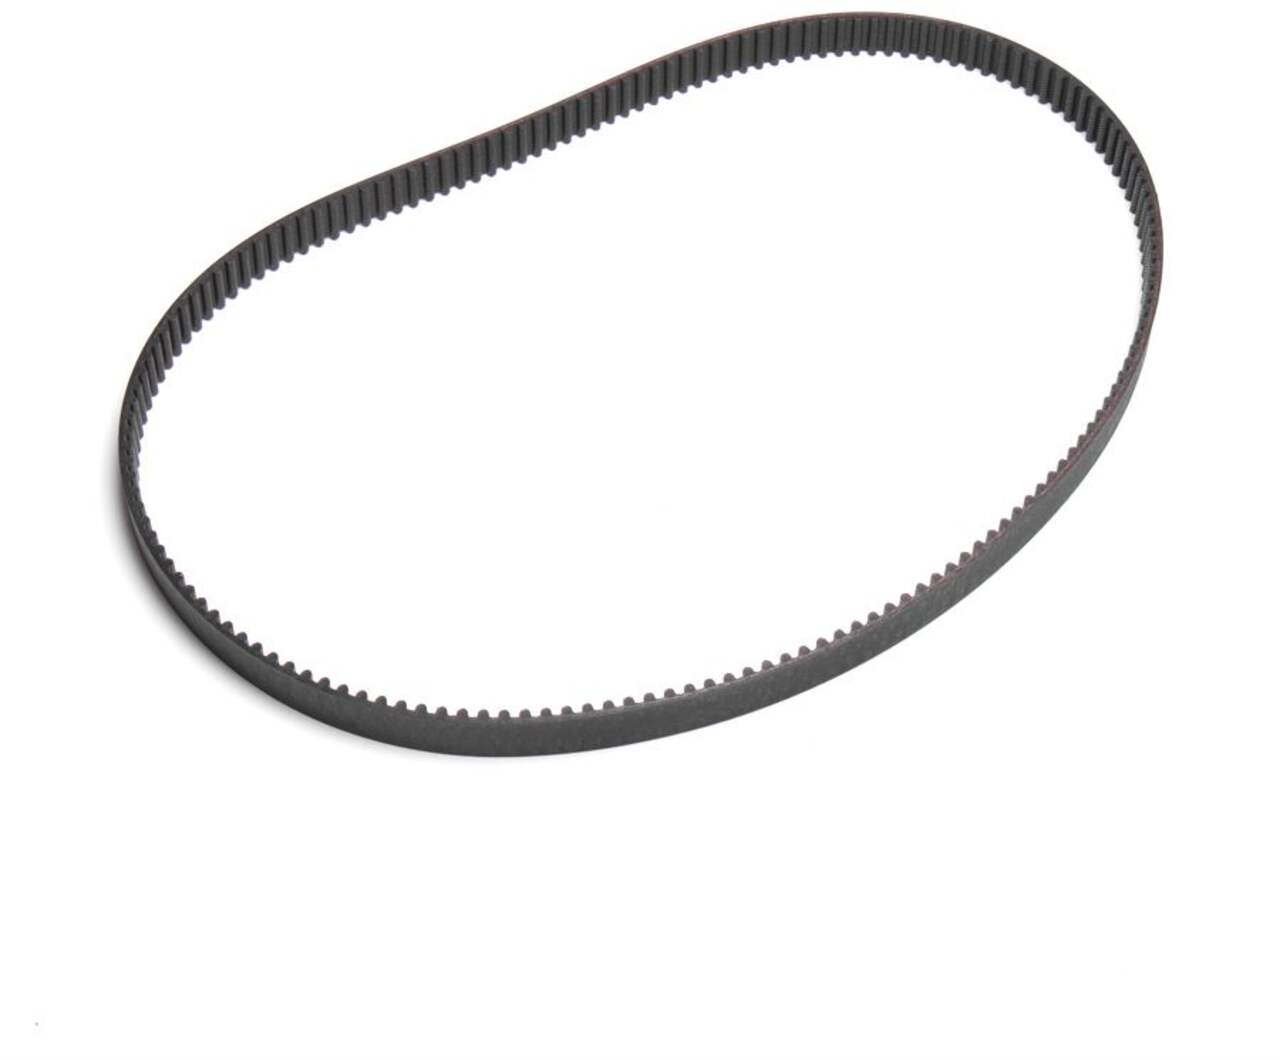 Certified Snowblower Replacement Drive Belt for CT#: 060-3732